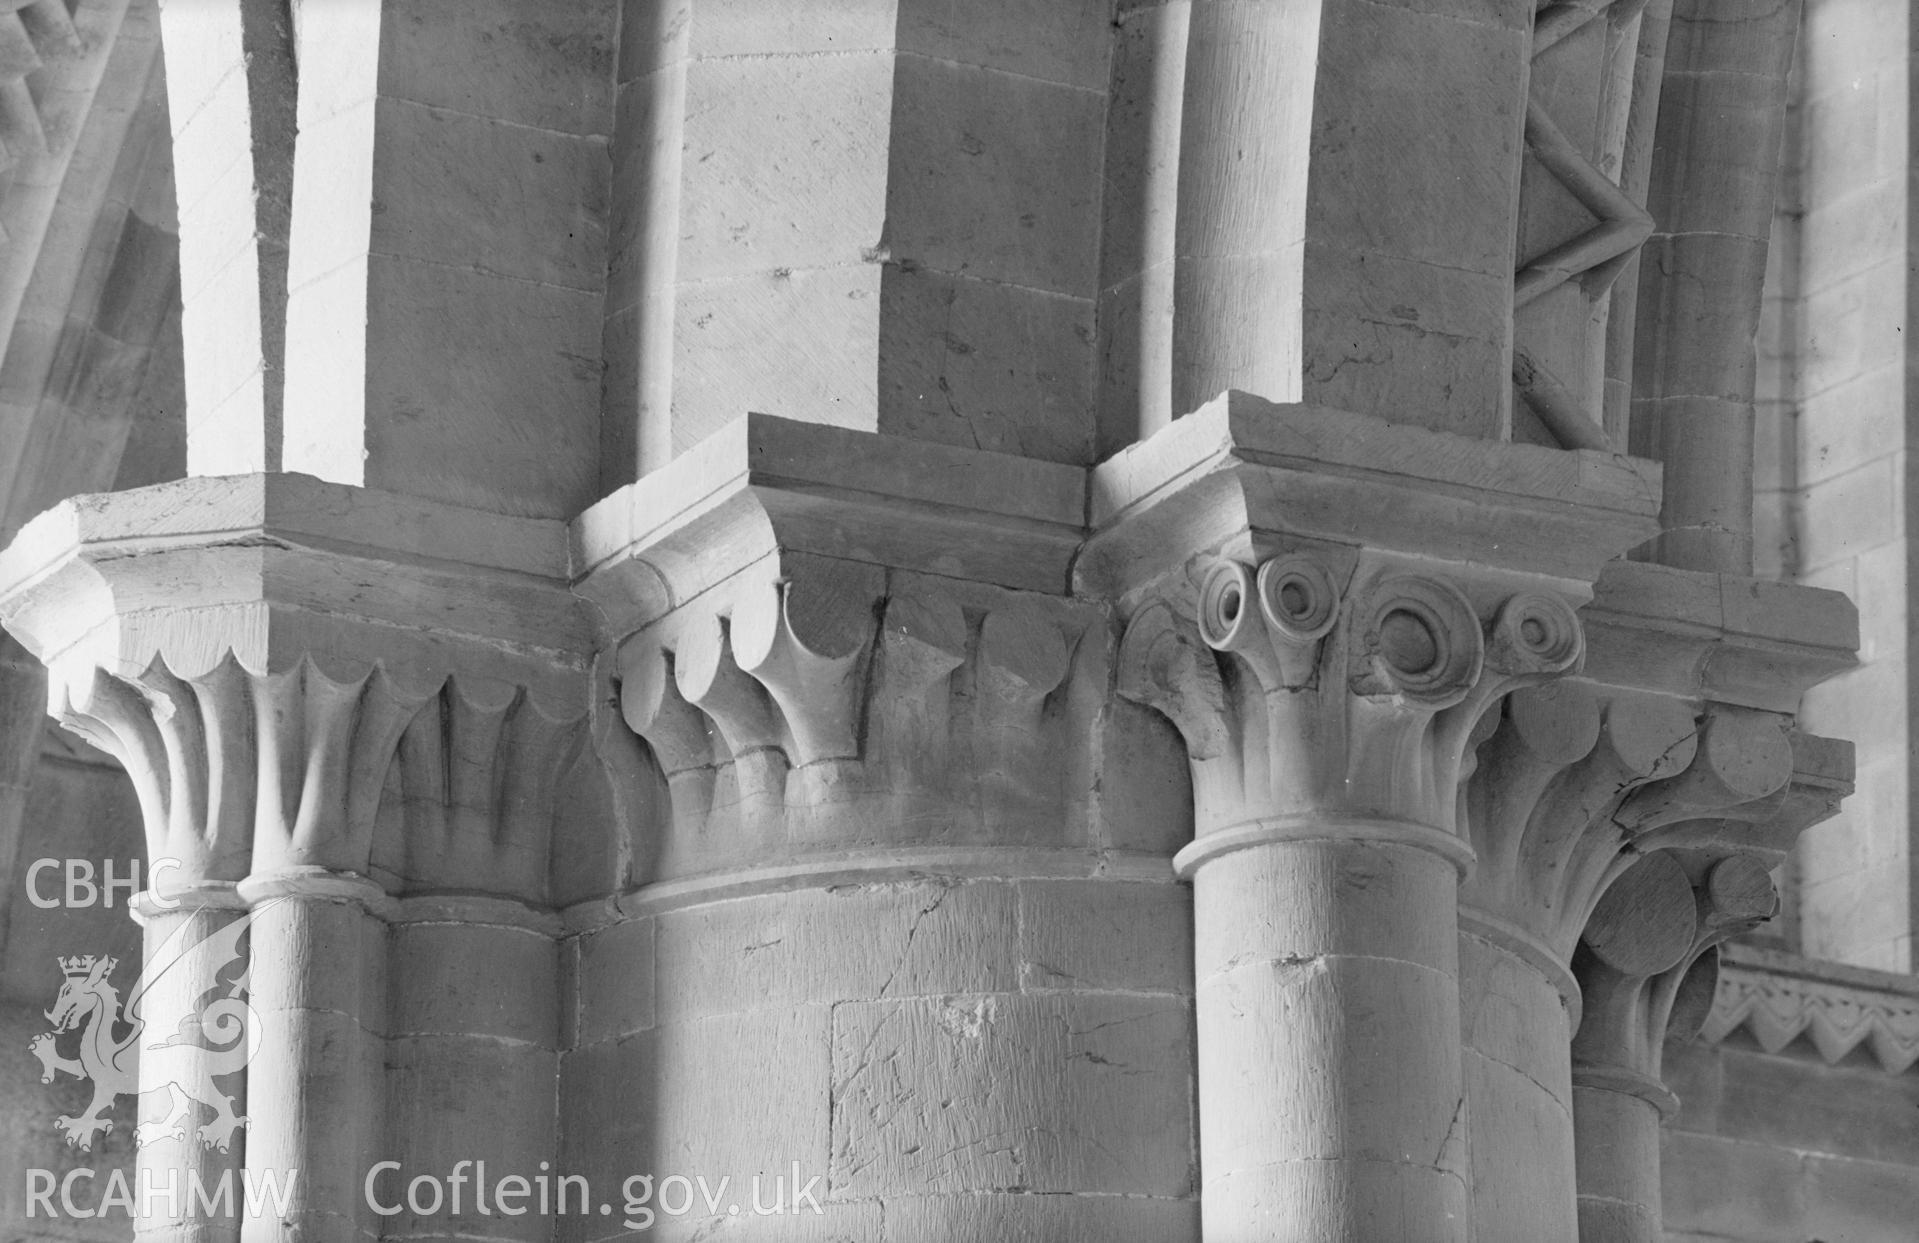 Digital copy of a black and white acetate negative showing detail of capital at St. David's Cathedral, taken by E.W. Lovegrove, July 1936